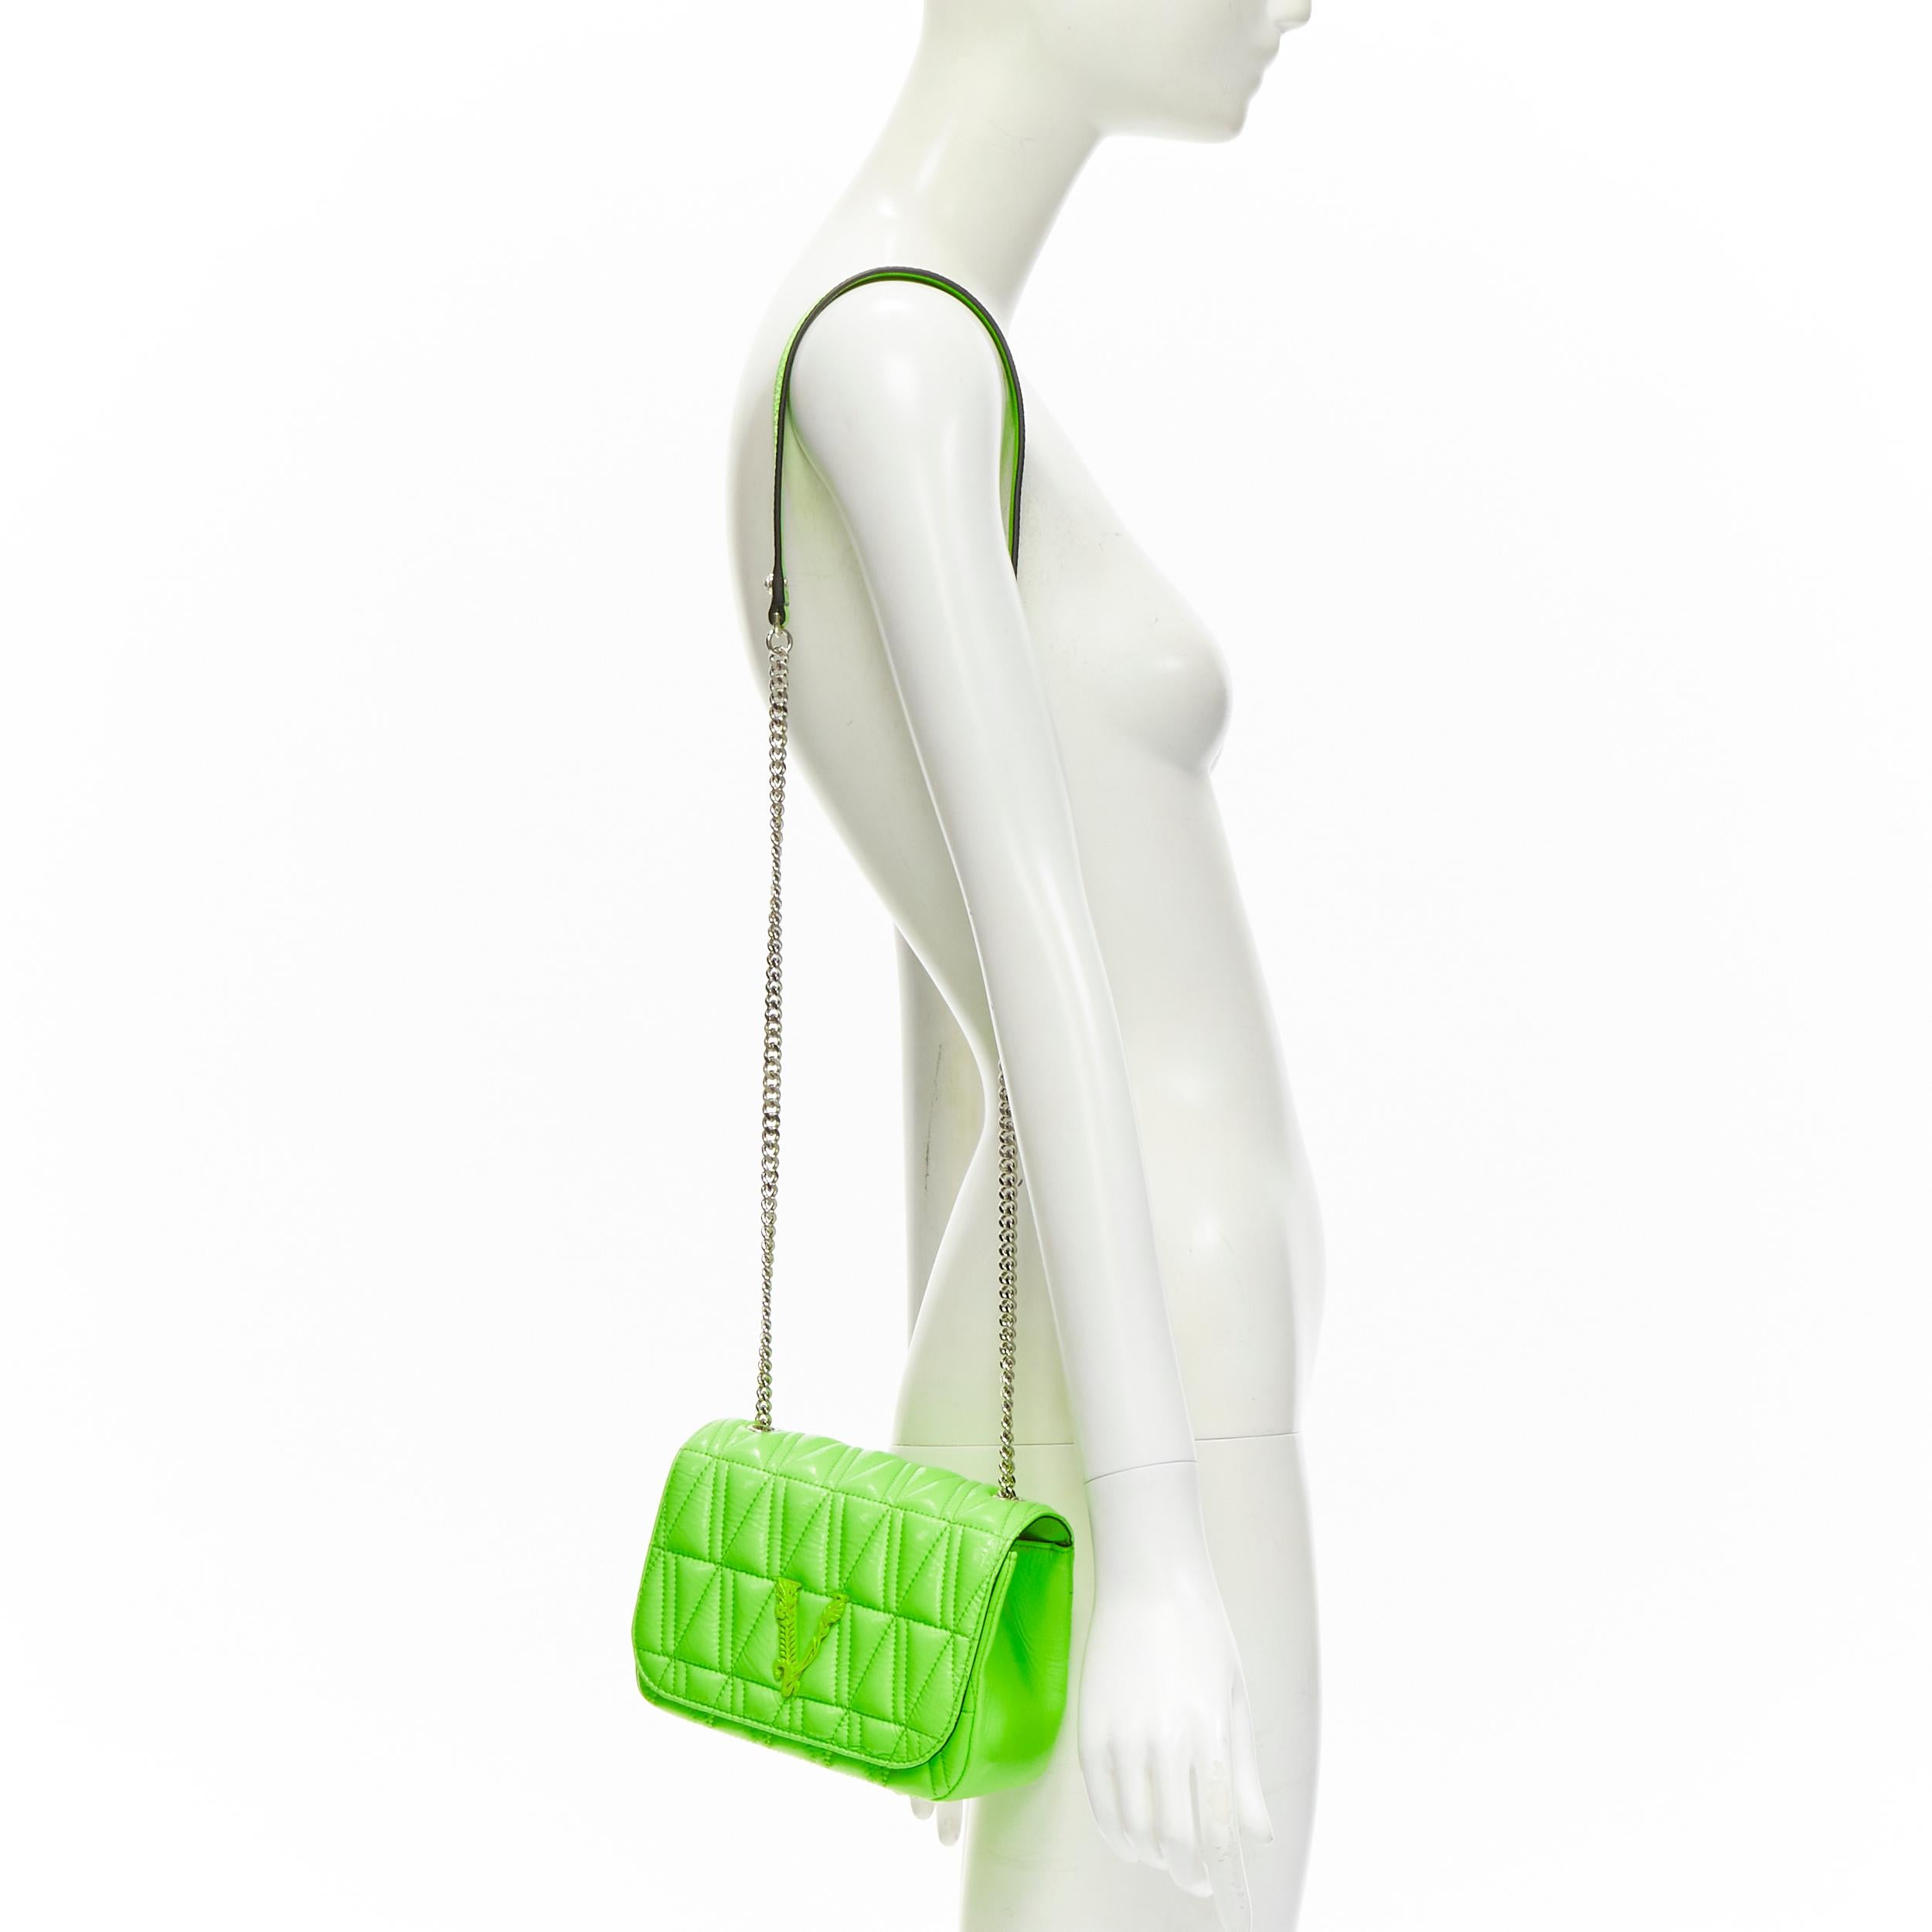 new VERSACE Virtus bright green V quilted patent leather crossbody flap bag
Reference: TGAS/C01850
Brand: Versace
Designer: Donatella Versace
Model: DBFH821 DNAPLT DAGJP
Collection: Virtus
Material: Patent Leather
Color: Green
Pattern: